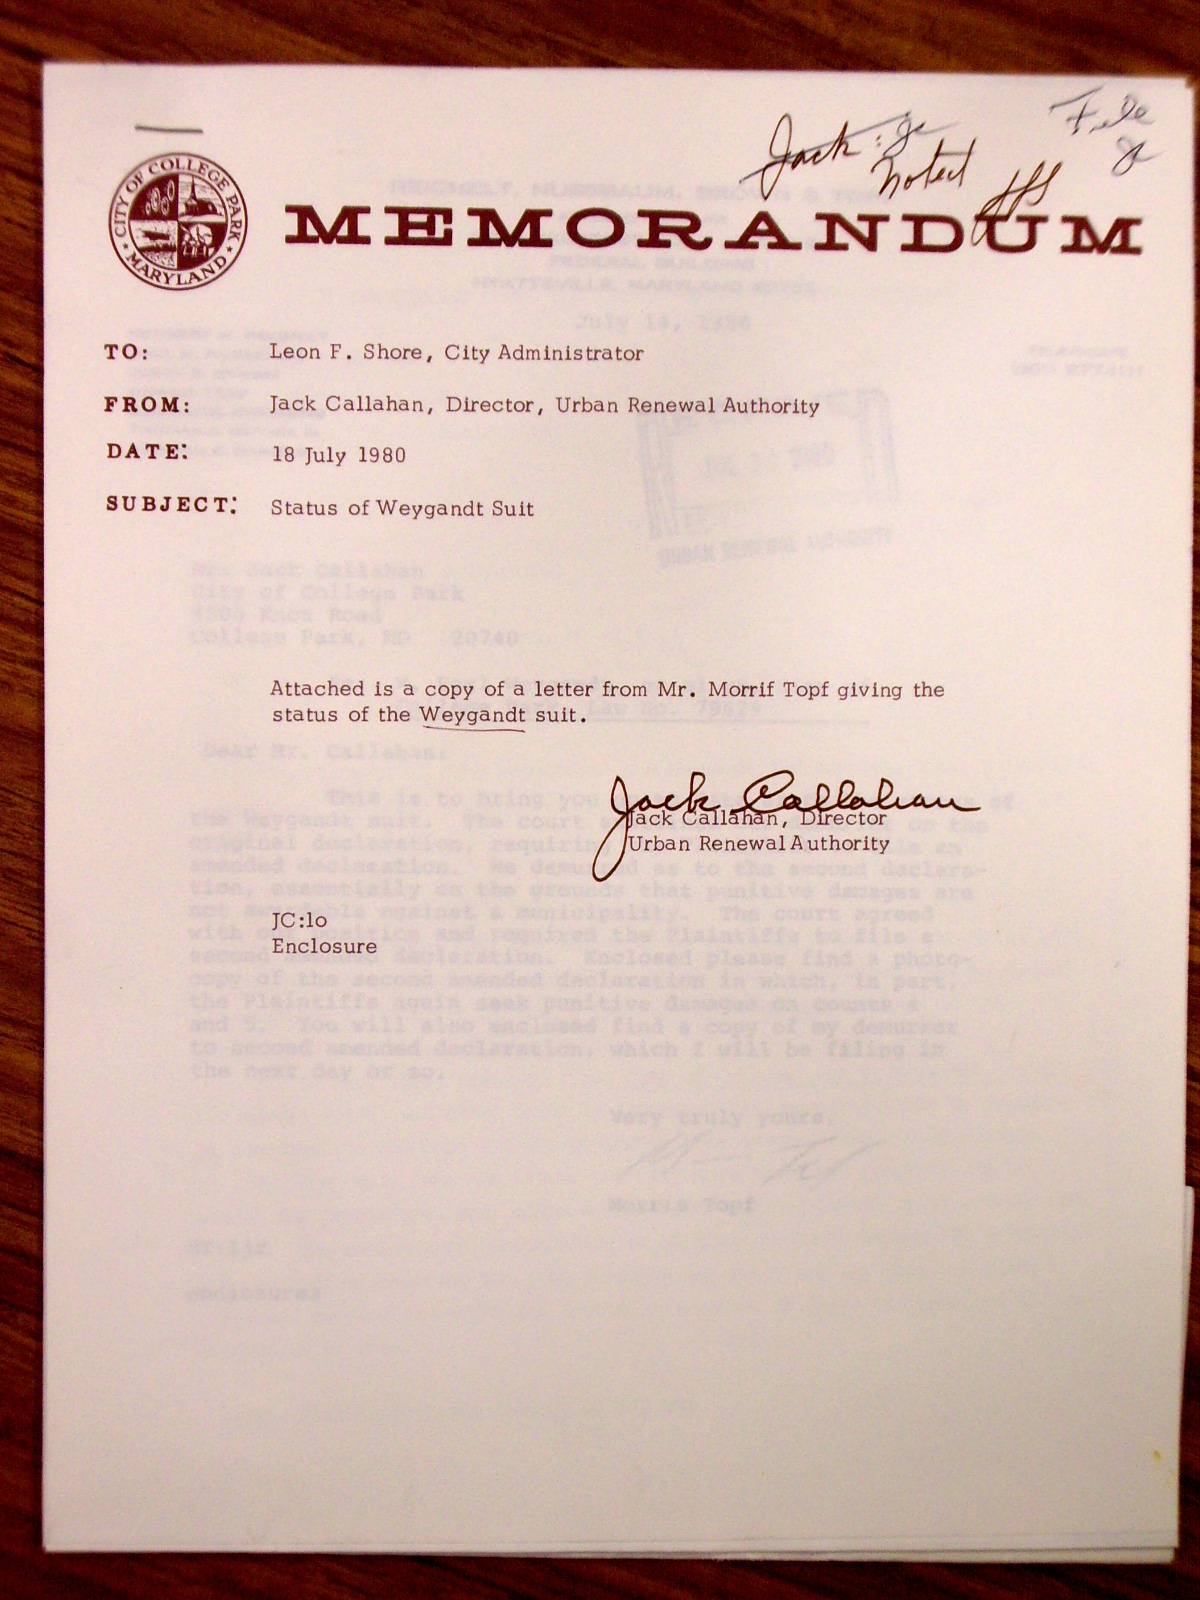 Memorandum from Jack Callahan to Leon Shore, enclosing a letter from Mr. Morris Topf giving the status of the Weygandt suit